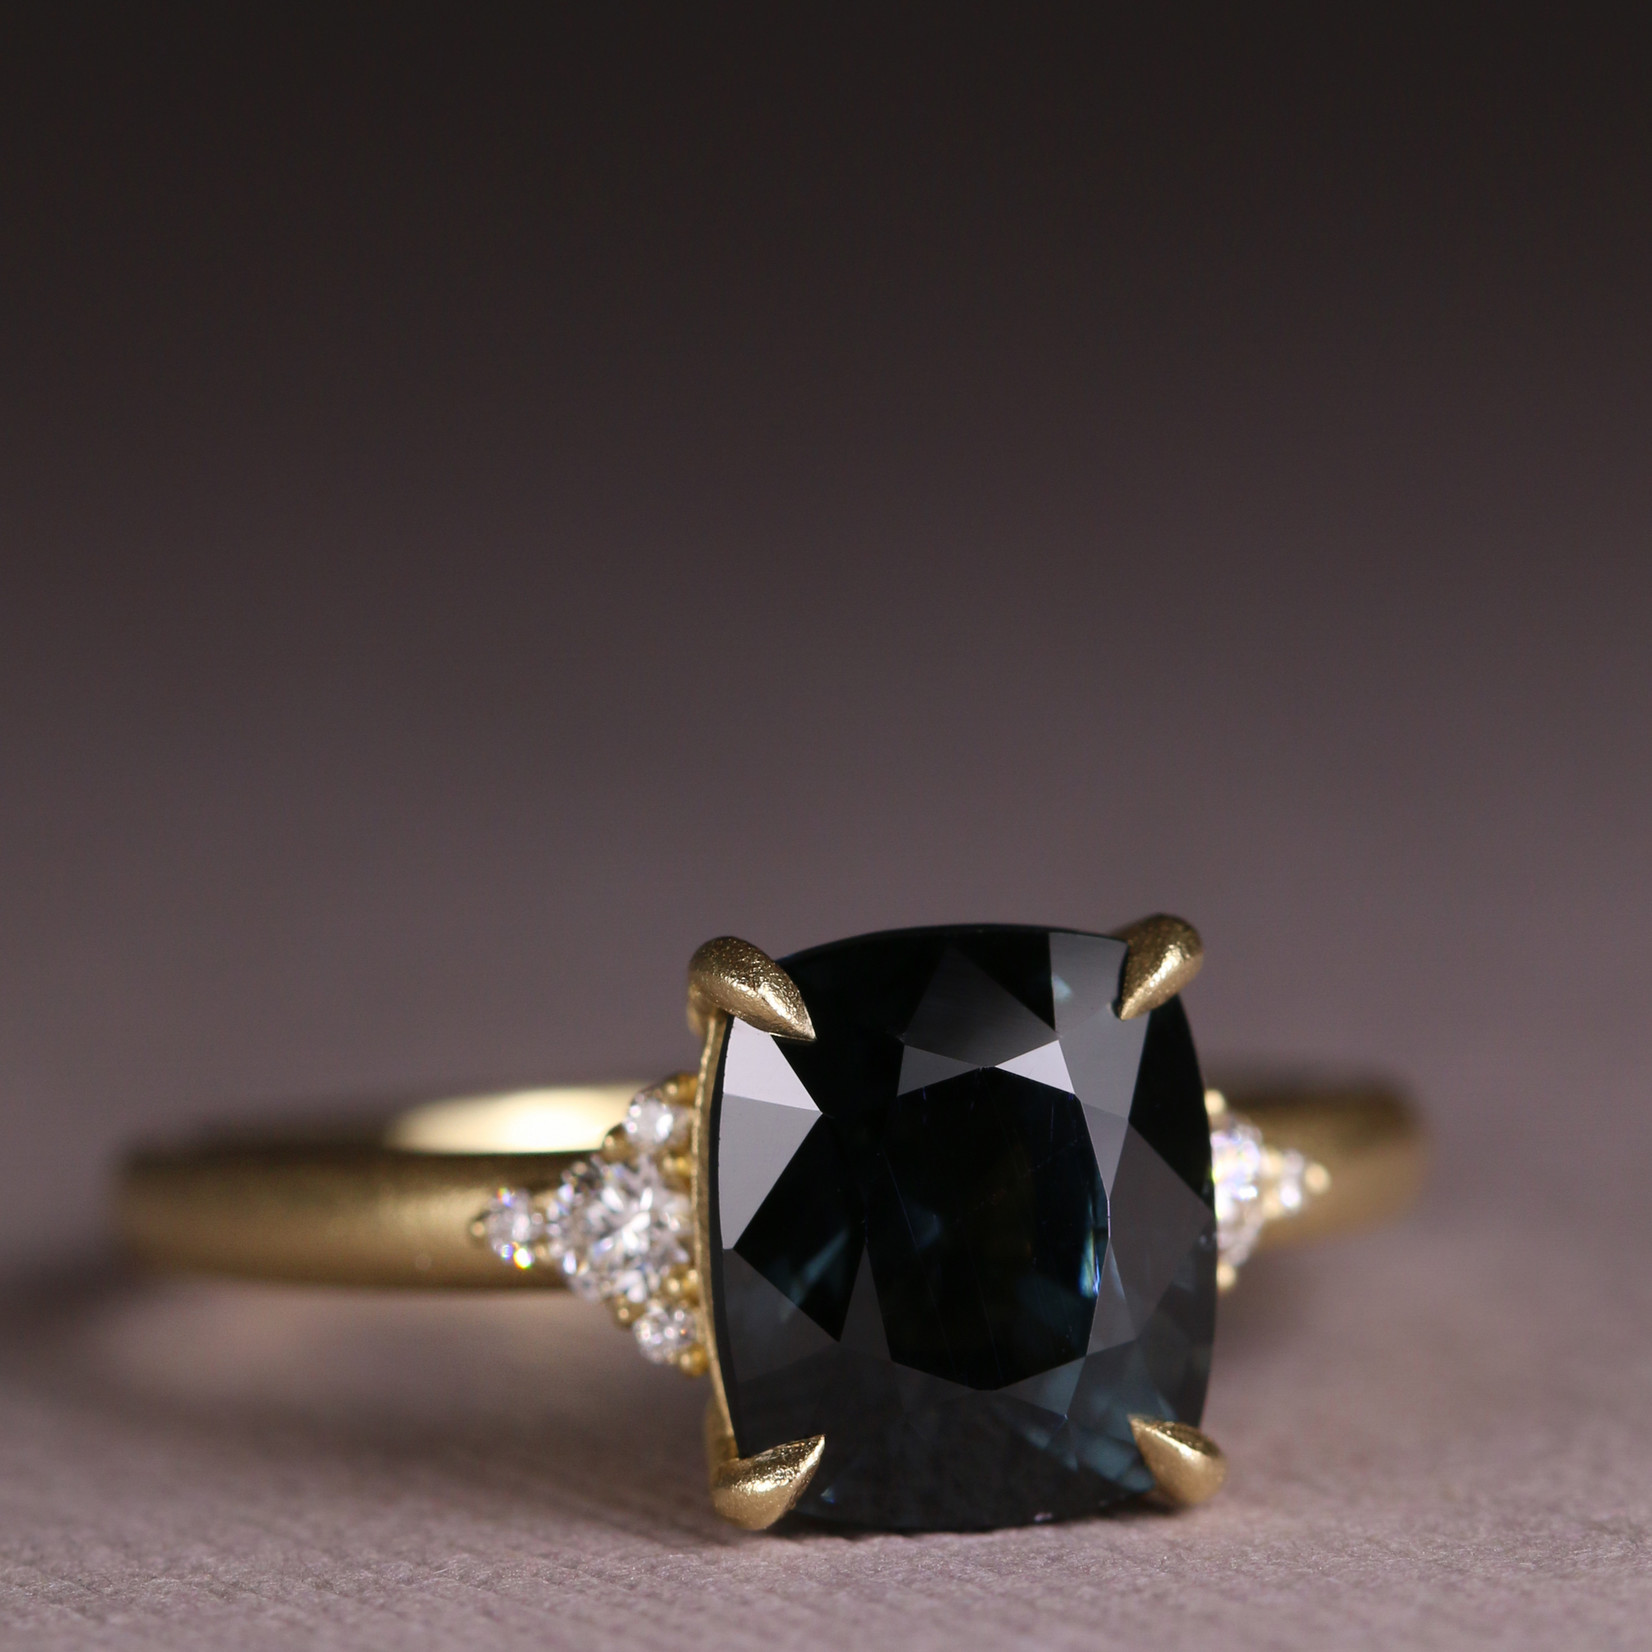 Baxter Moerman Maddie Ring with Midnight Spinel